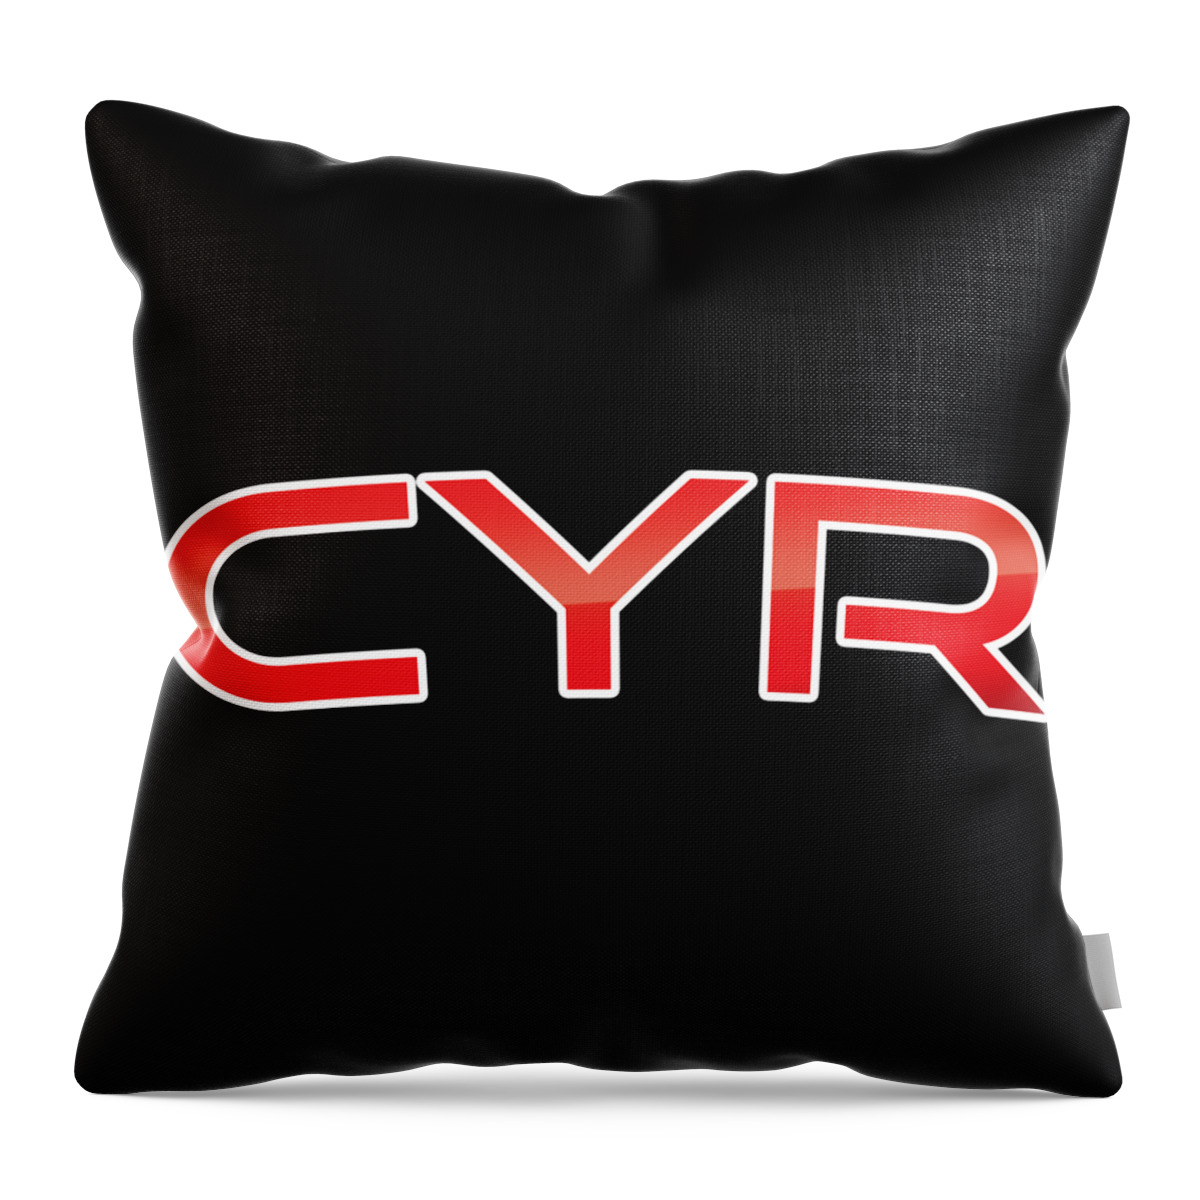 Cyr Throw Pillow featuring the digital art Cyr by TintoDesigns